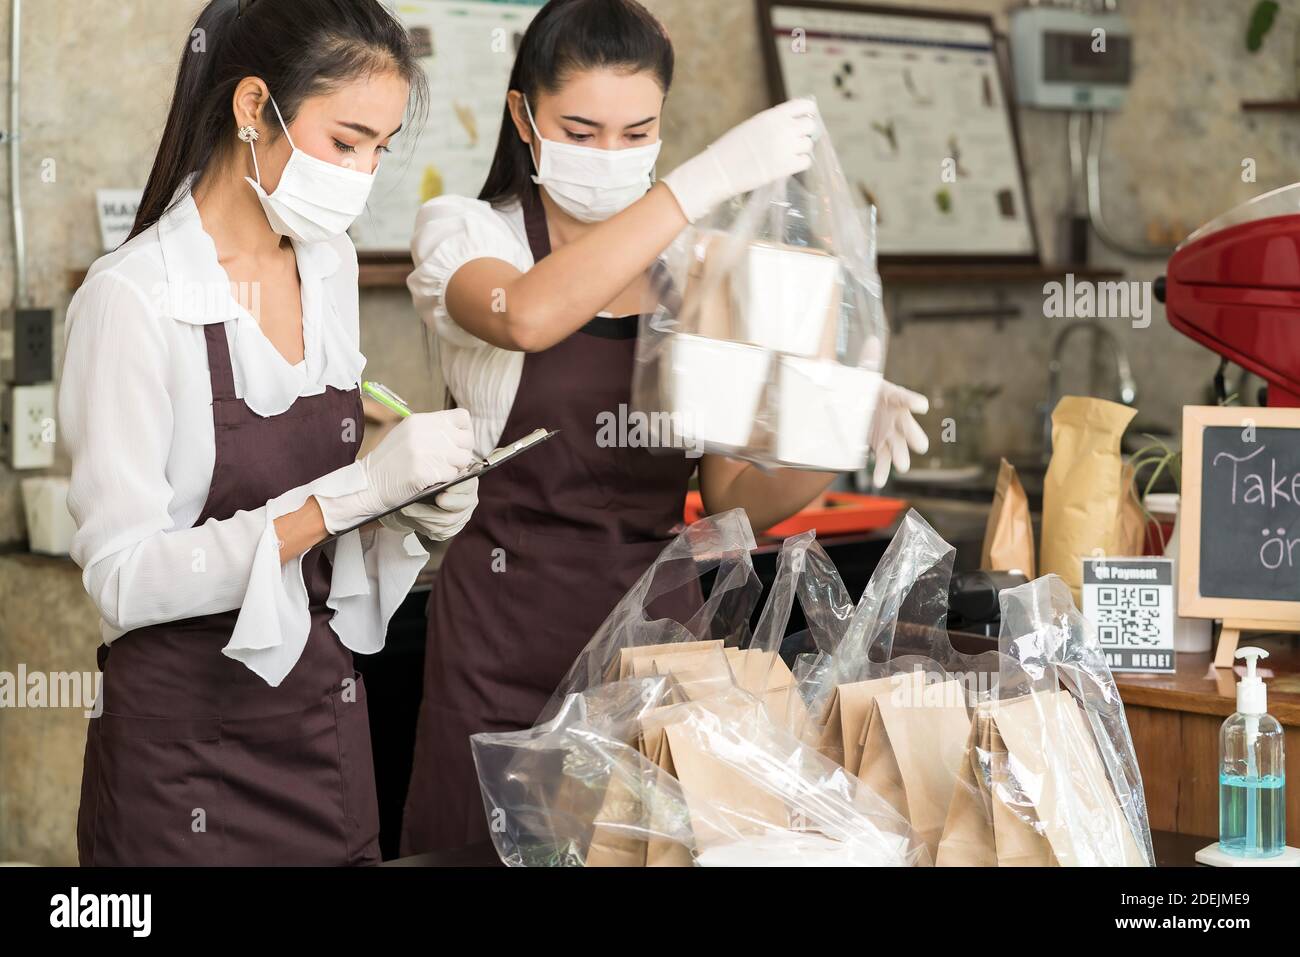 Asian waitress wear protective face mask prepare food for takeout and curbside pickup orders while city lockdown from coronavirus COVID-19 pandemic. T Stock Photo